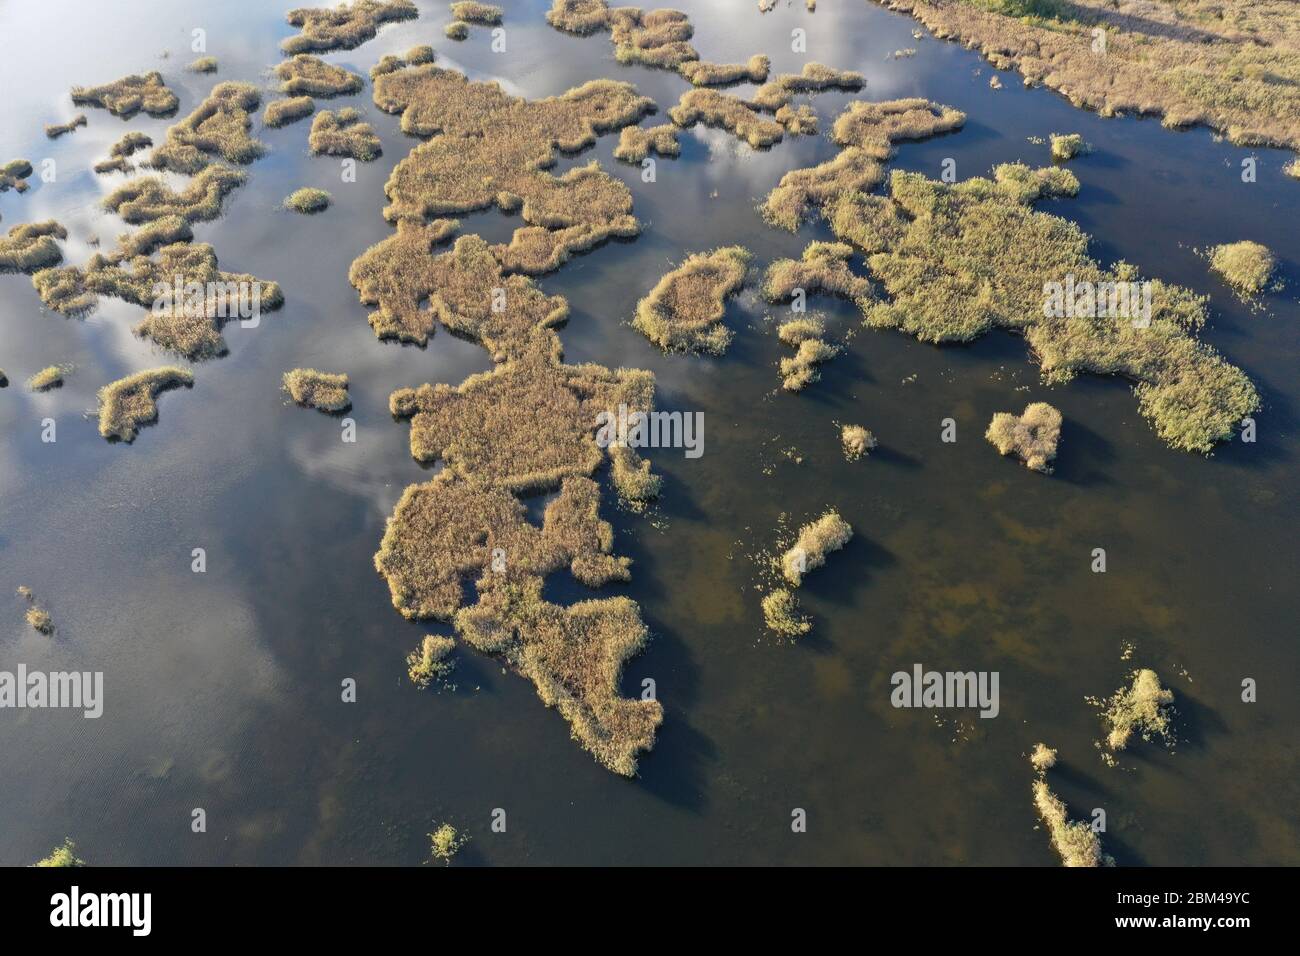 Reeds in lake water like a world map, aerial view Stock Photo